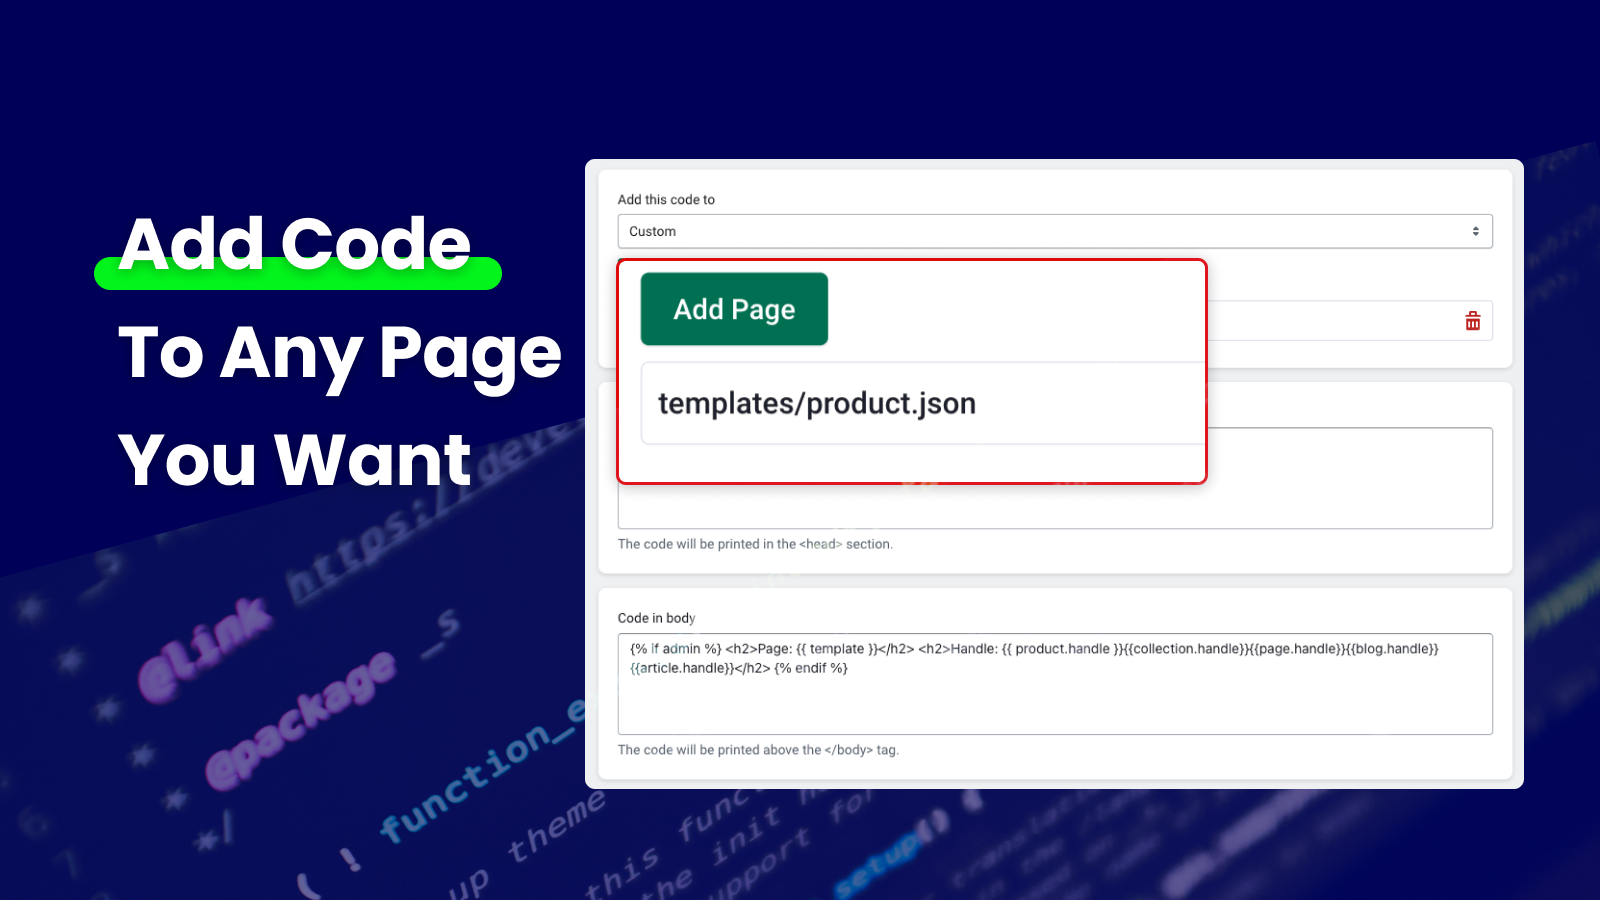 Add code to any page you want